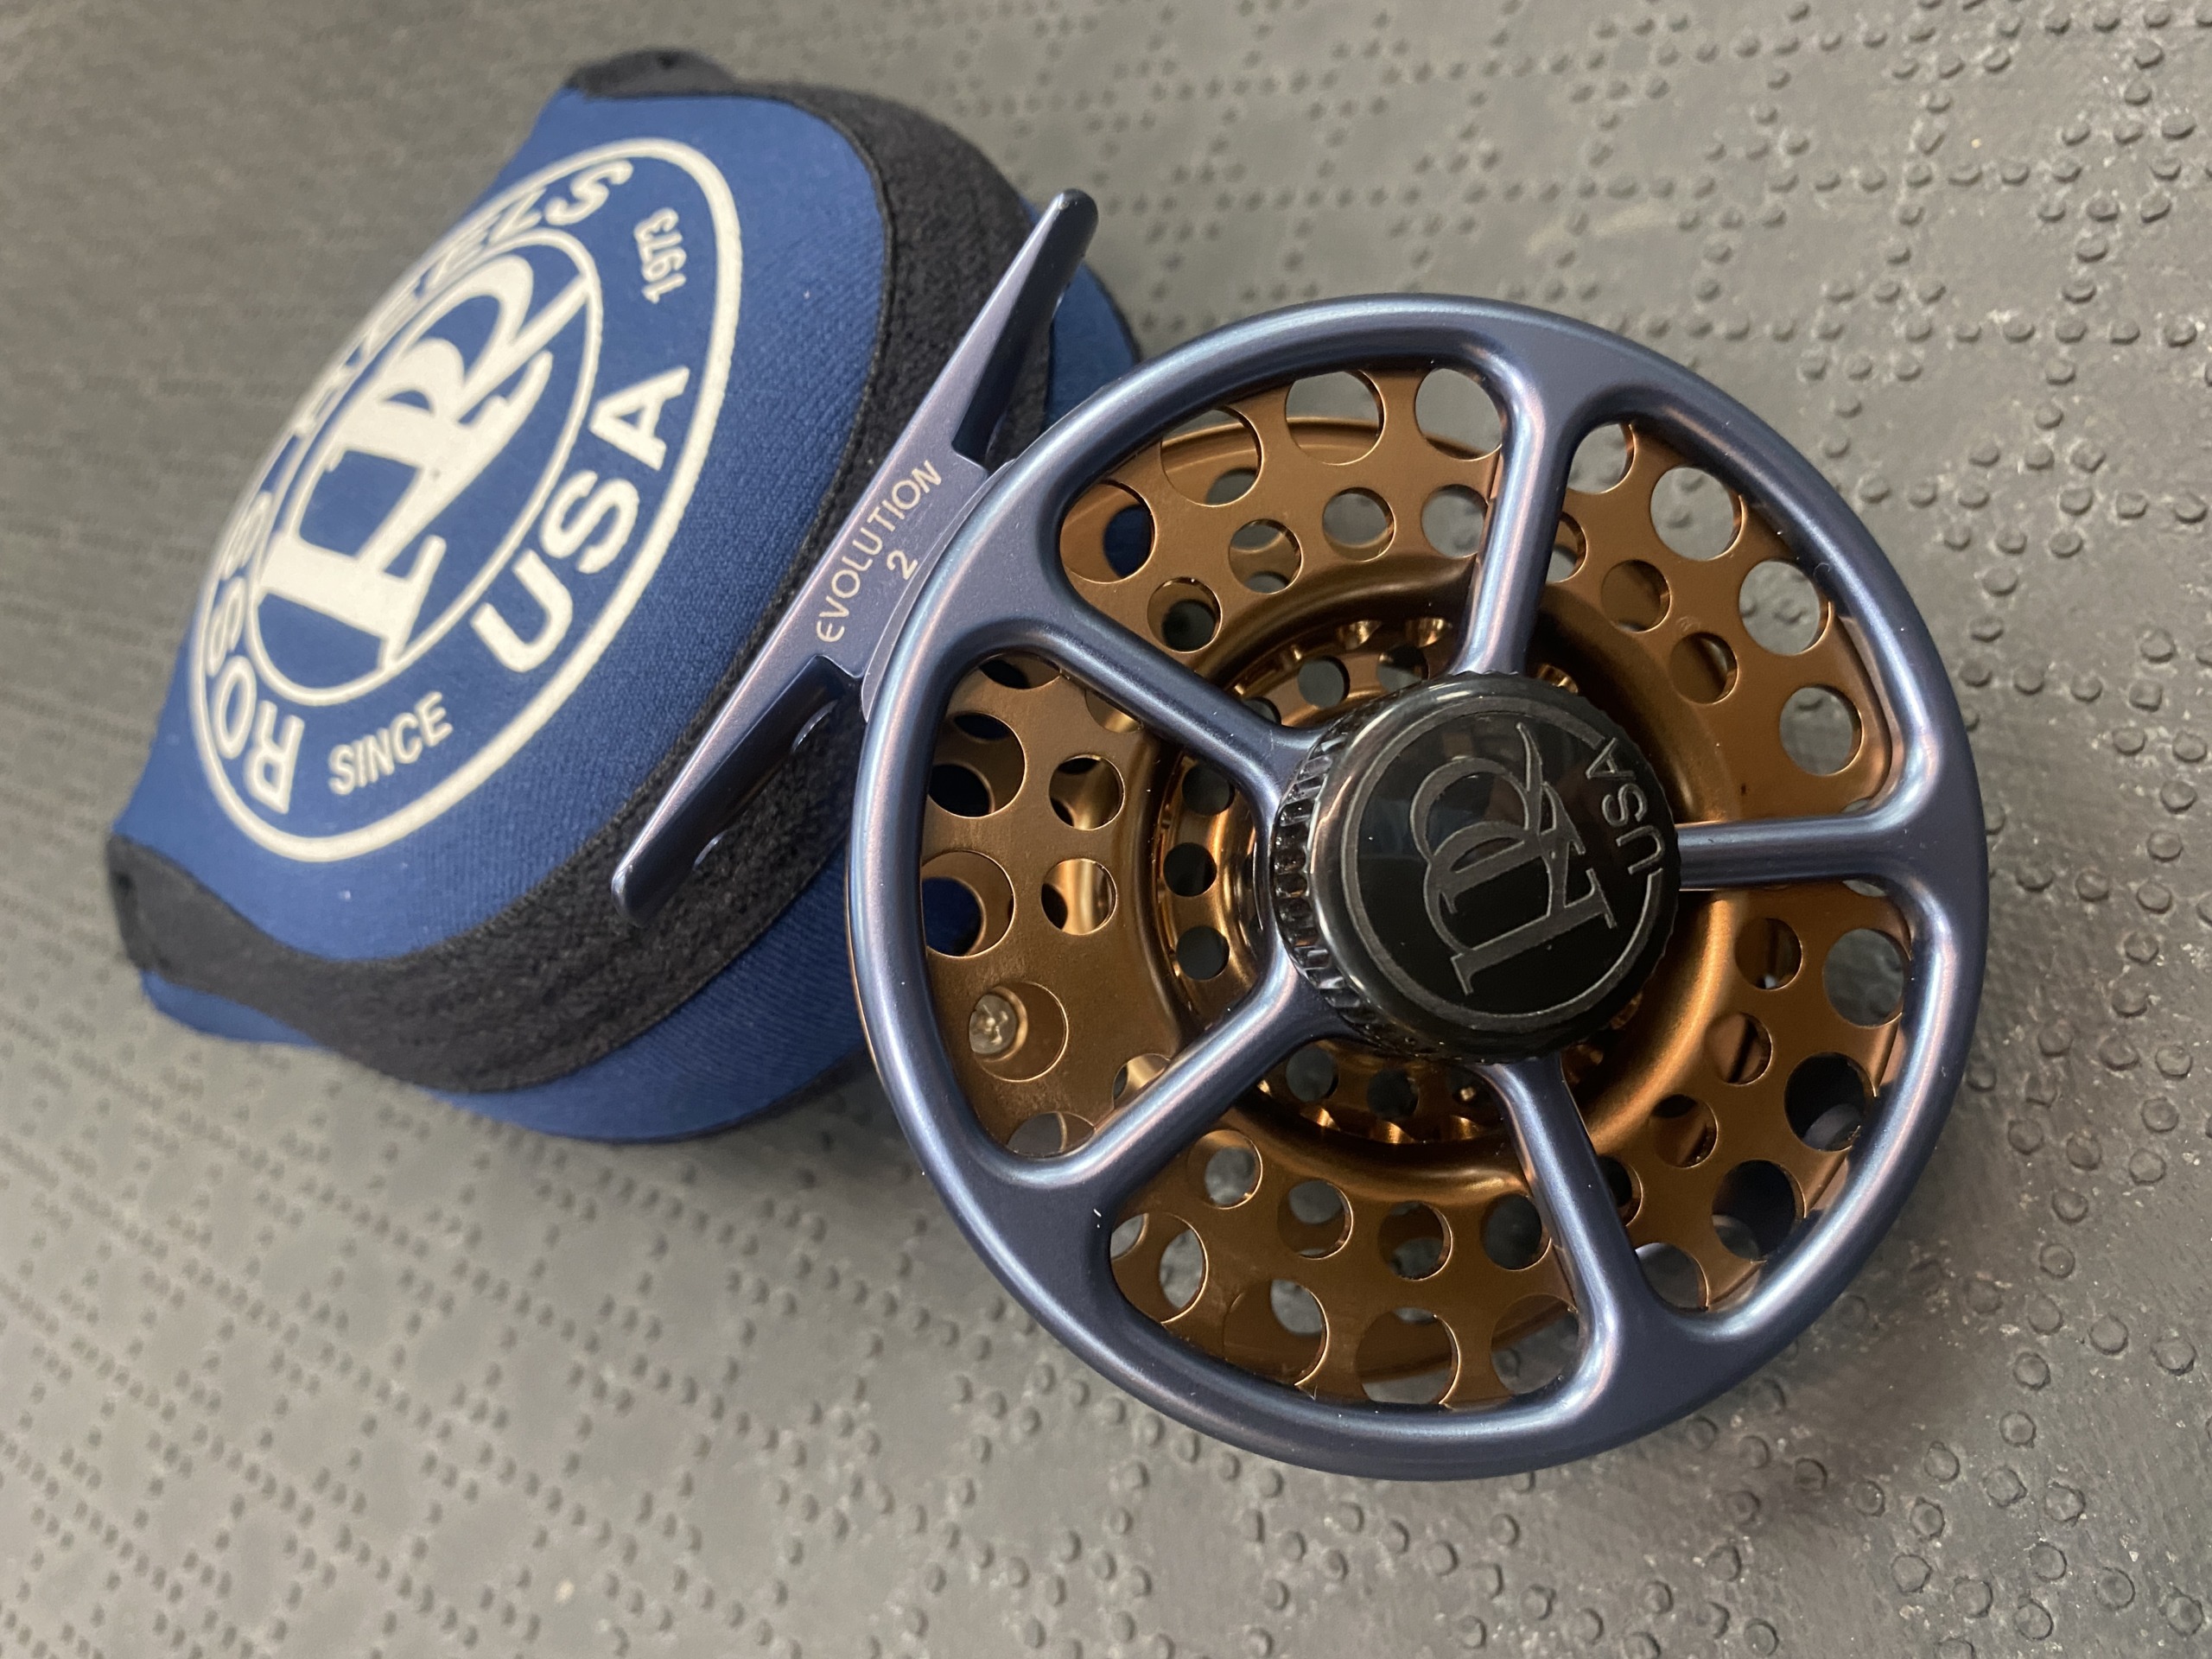 https://thefirstcast.ca/wp-content/uploads/2021/08/Ross-Evolution-Number-2-Fly-Reel-Blue-Copper-A-scaled.jpg